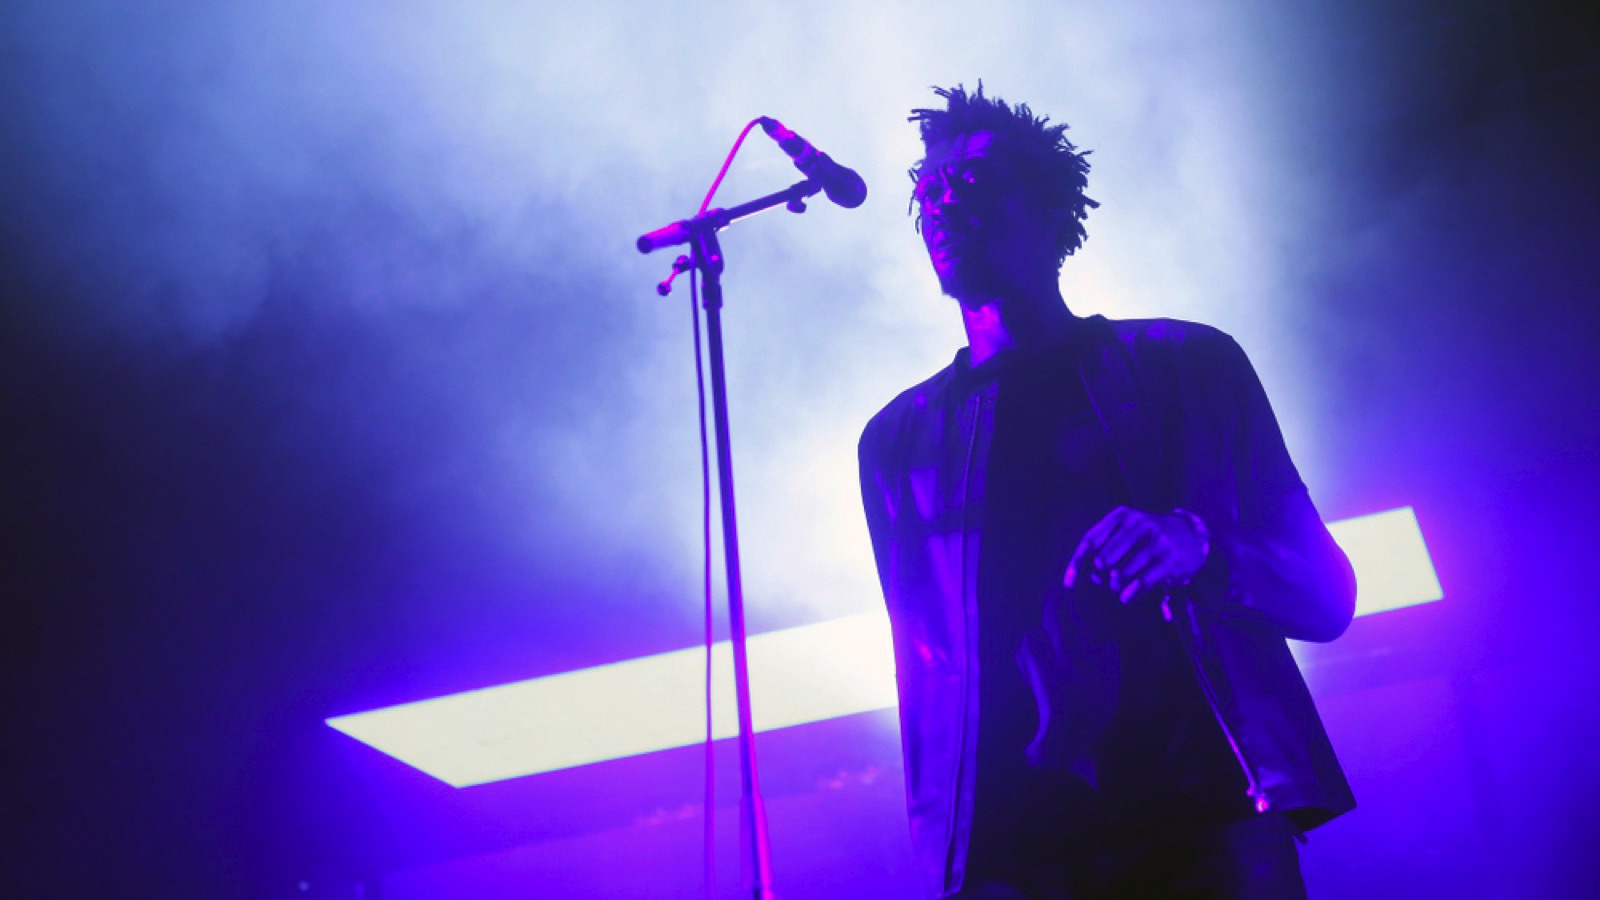 Barcelona, Spain / June 14, 2014: British electronic music band Massive Attack performs live during Sonar advanced music ands arts festival at Fira de Barcelona